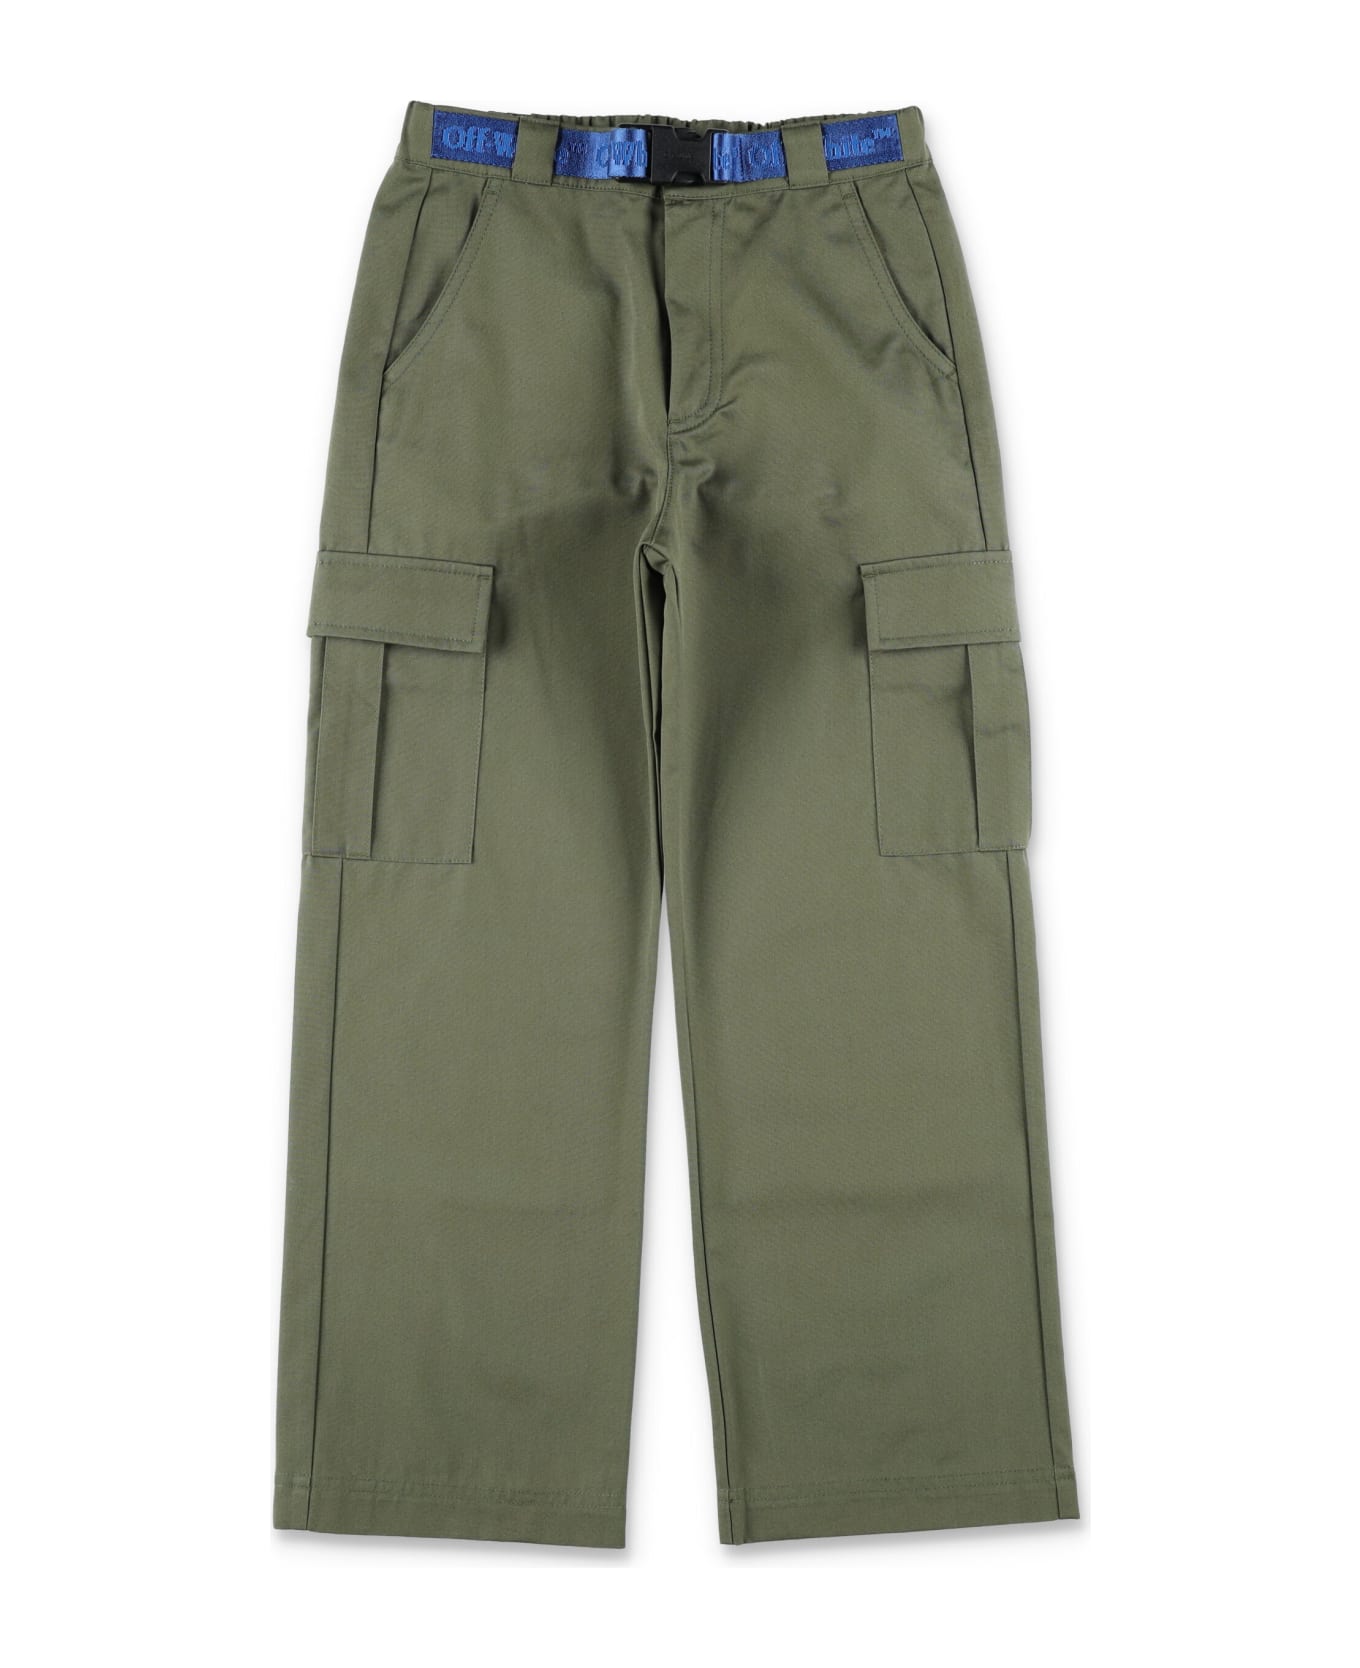 Off-White Pants Cargo - GREEN